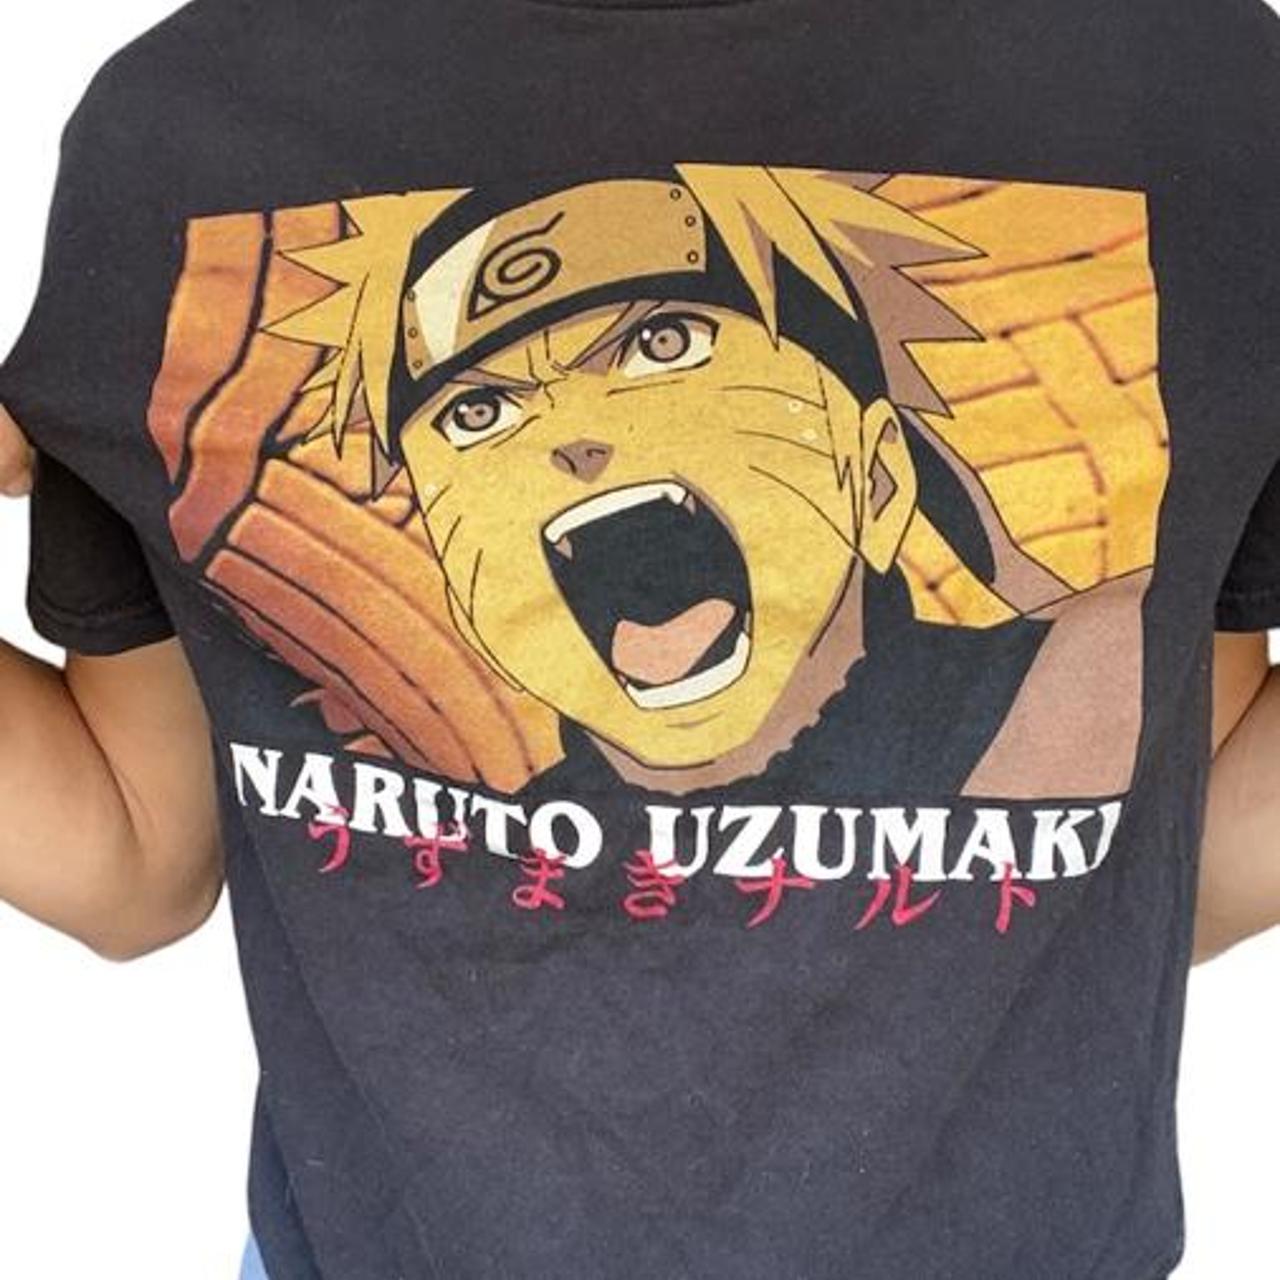 Product Image 4 - NARUTO T SHIRT 🖤💛

•good condition
•super